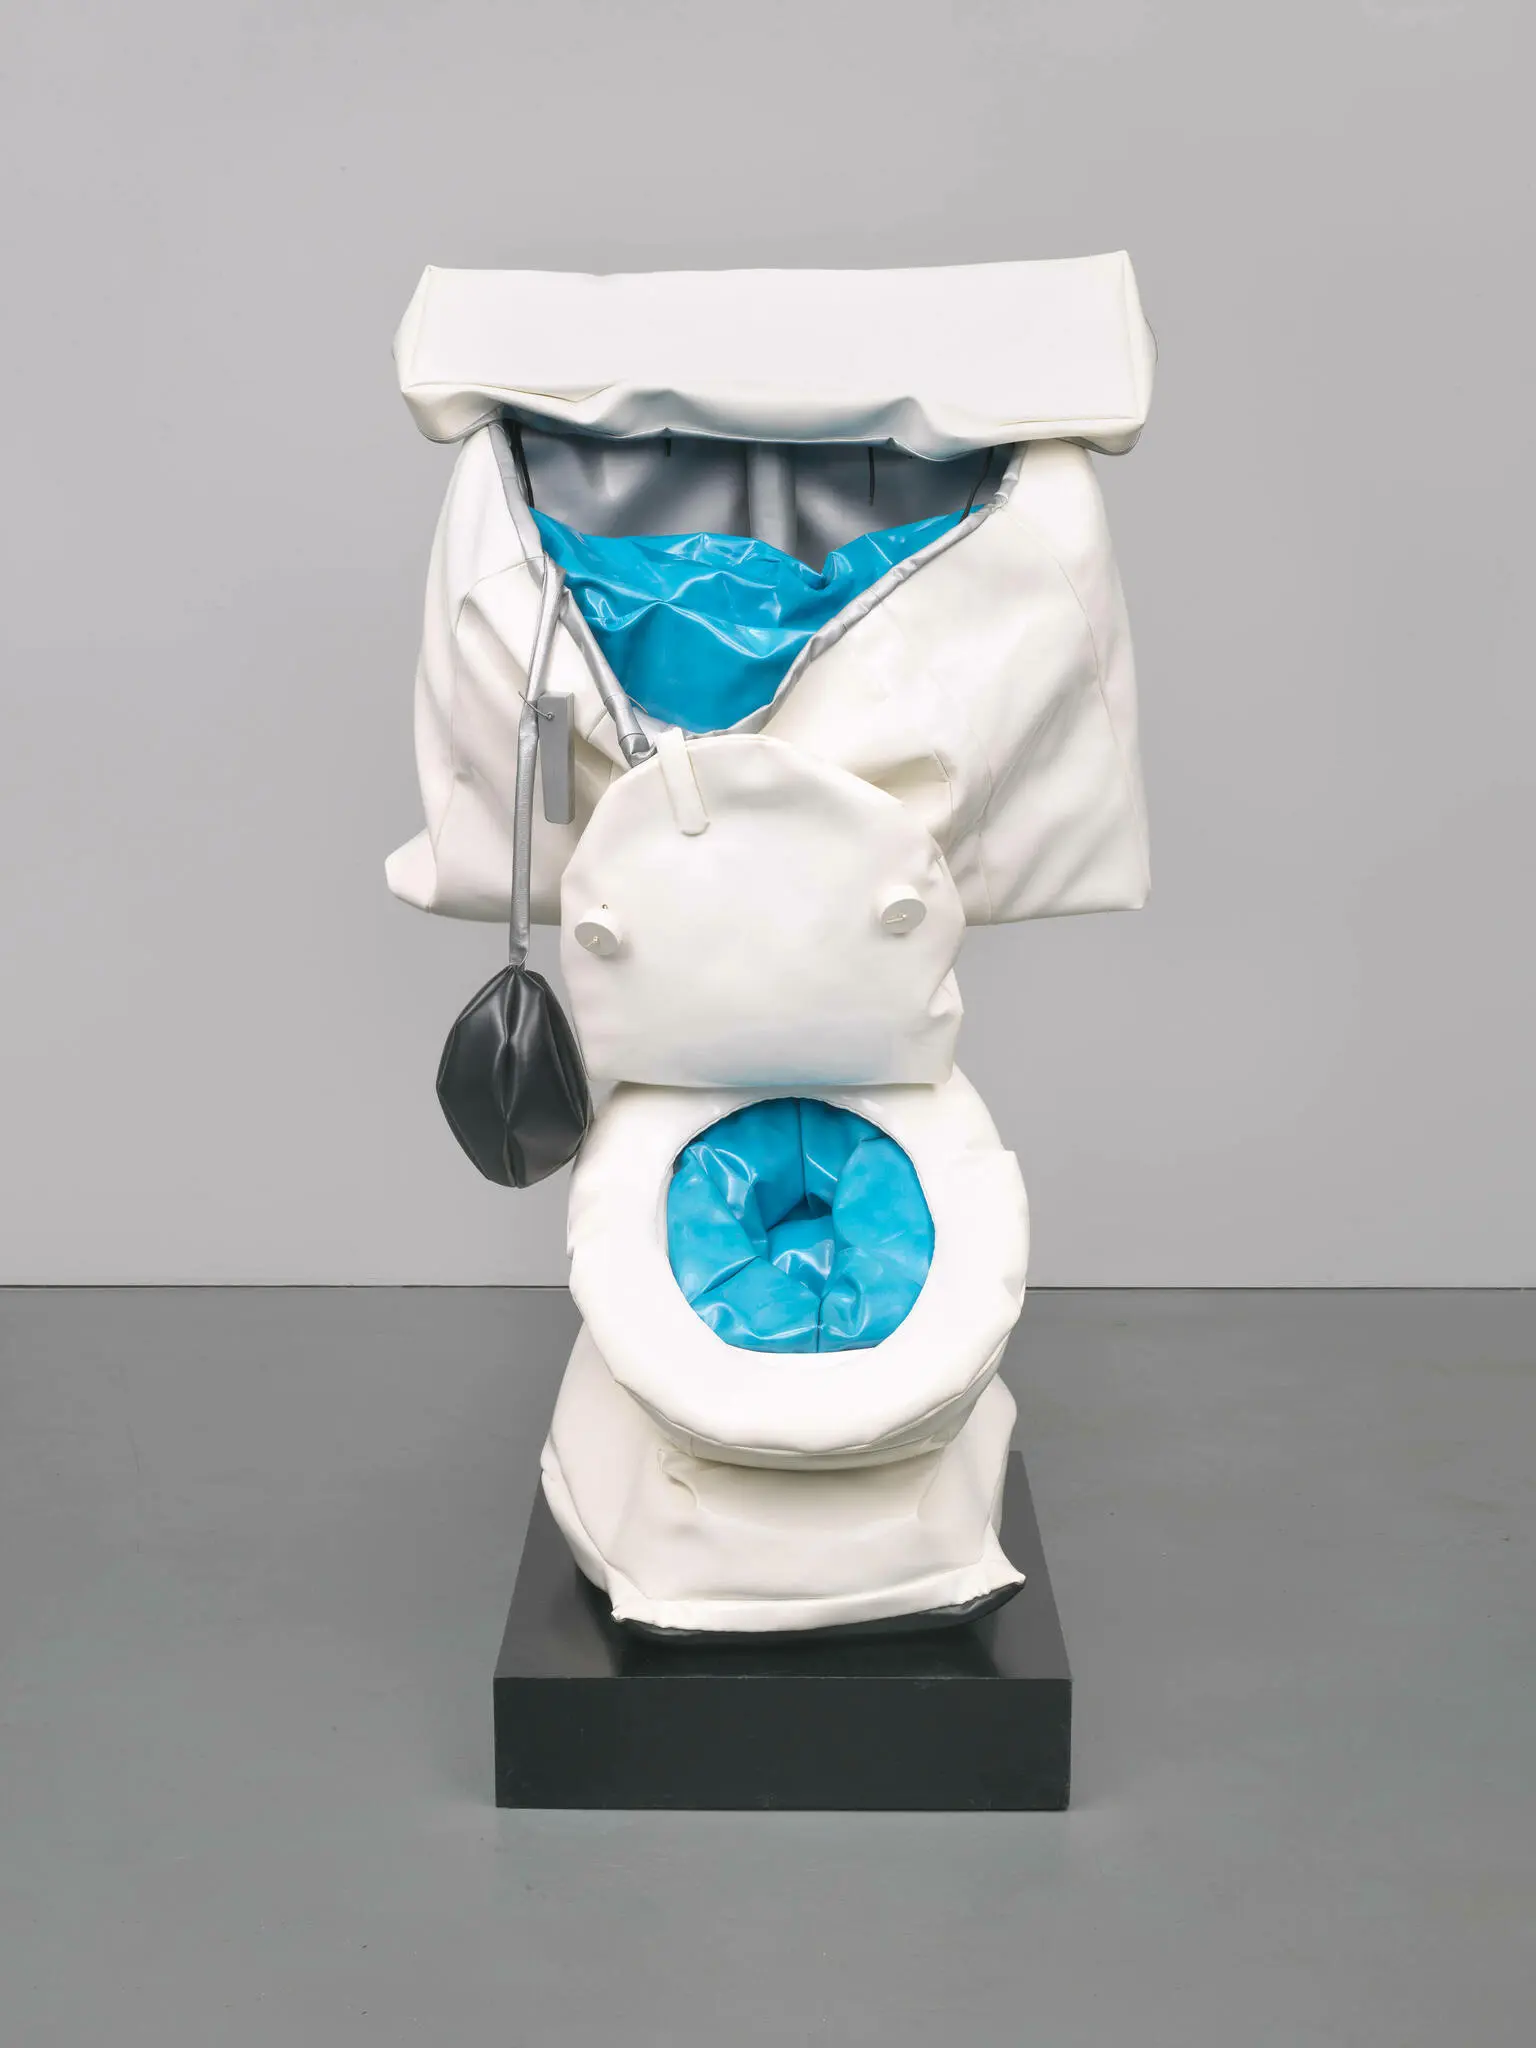 Claes Oldenburg inflatable toilet (source: Whitney Museum of American Art)